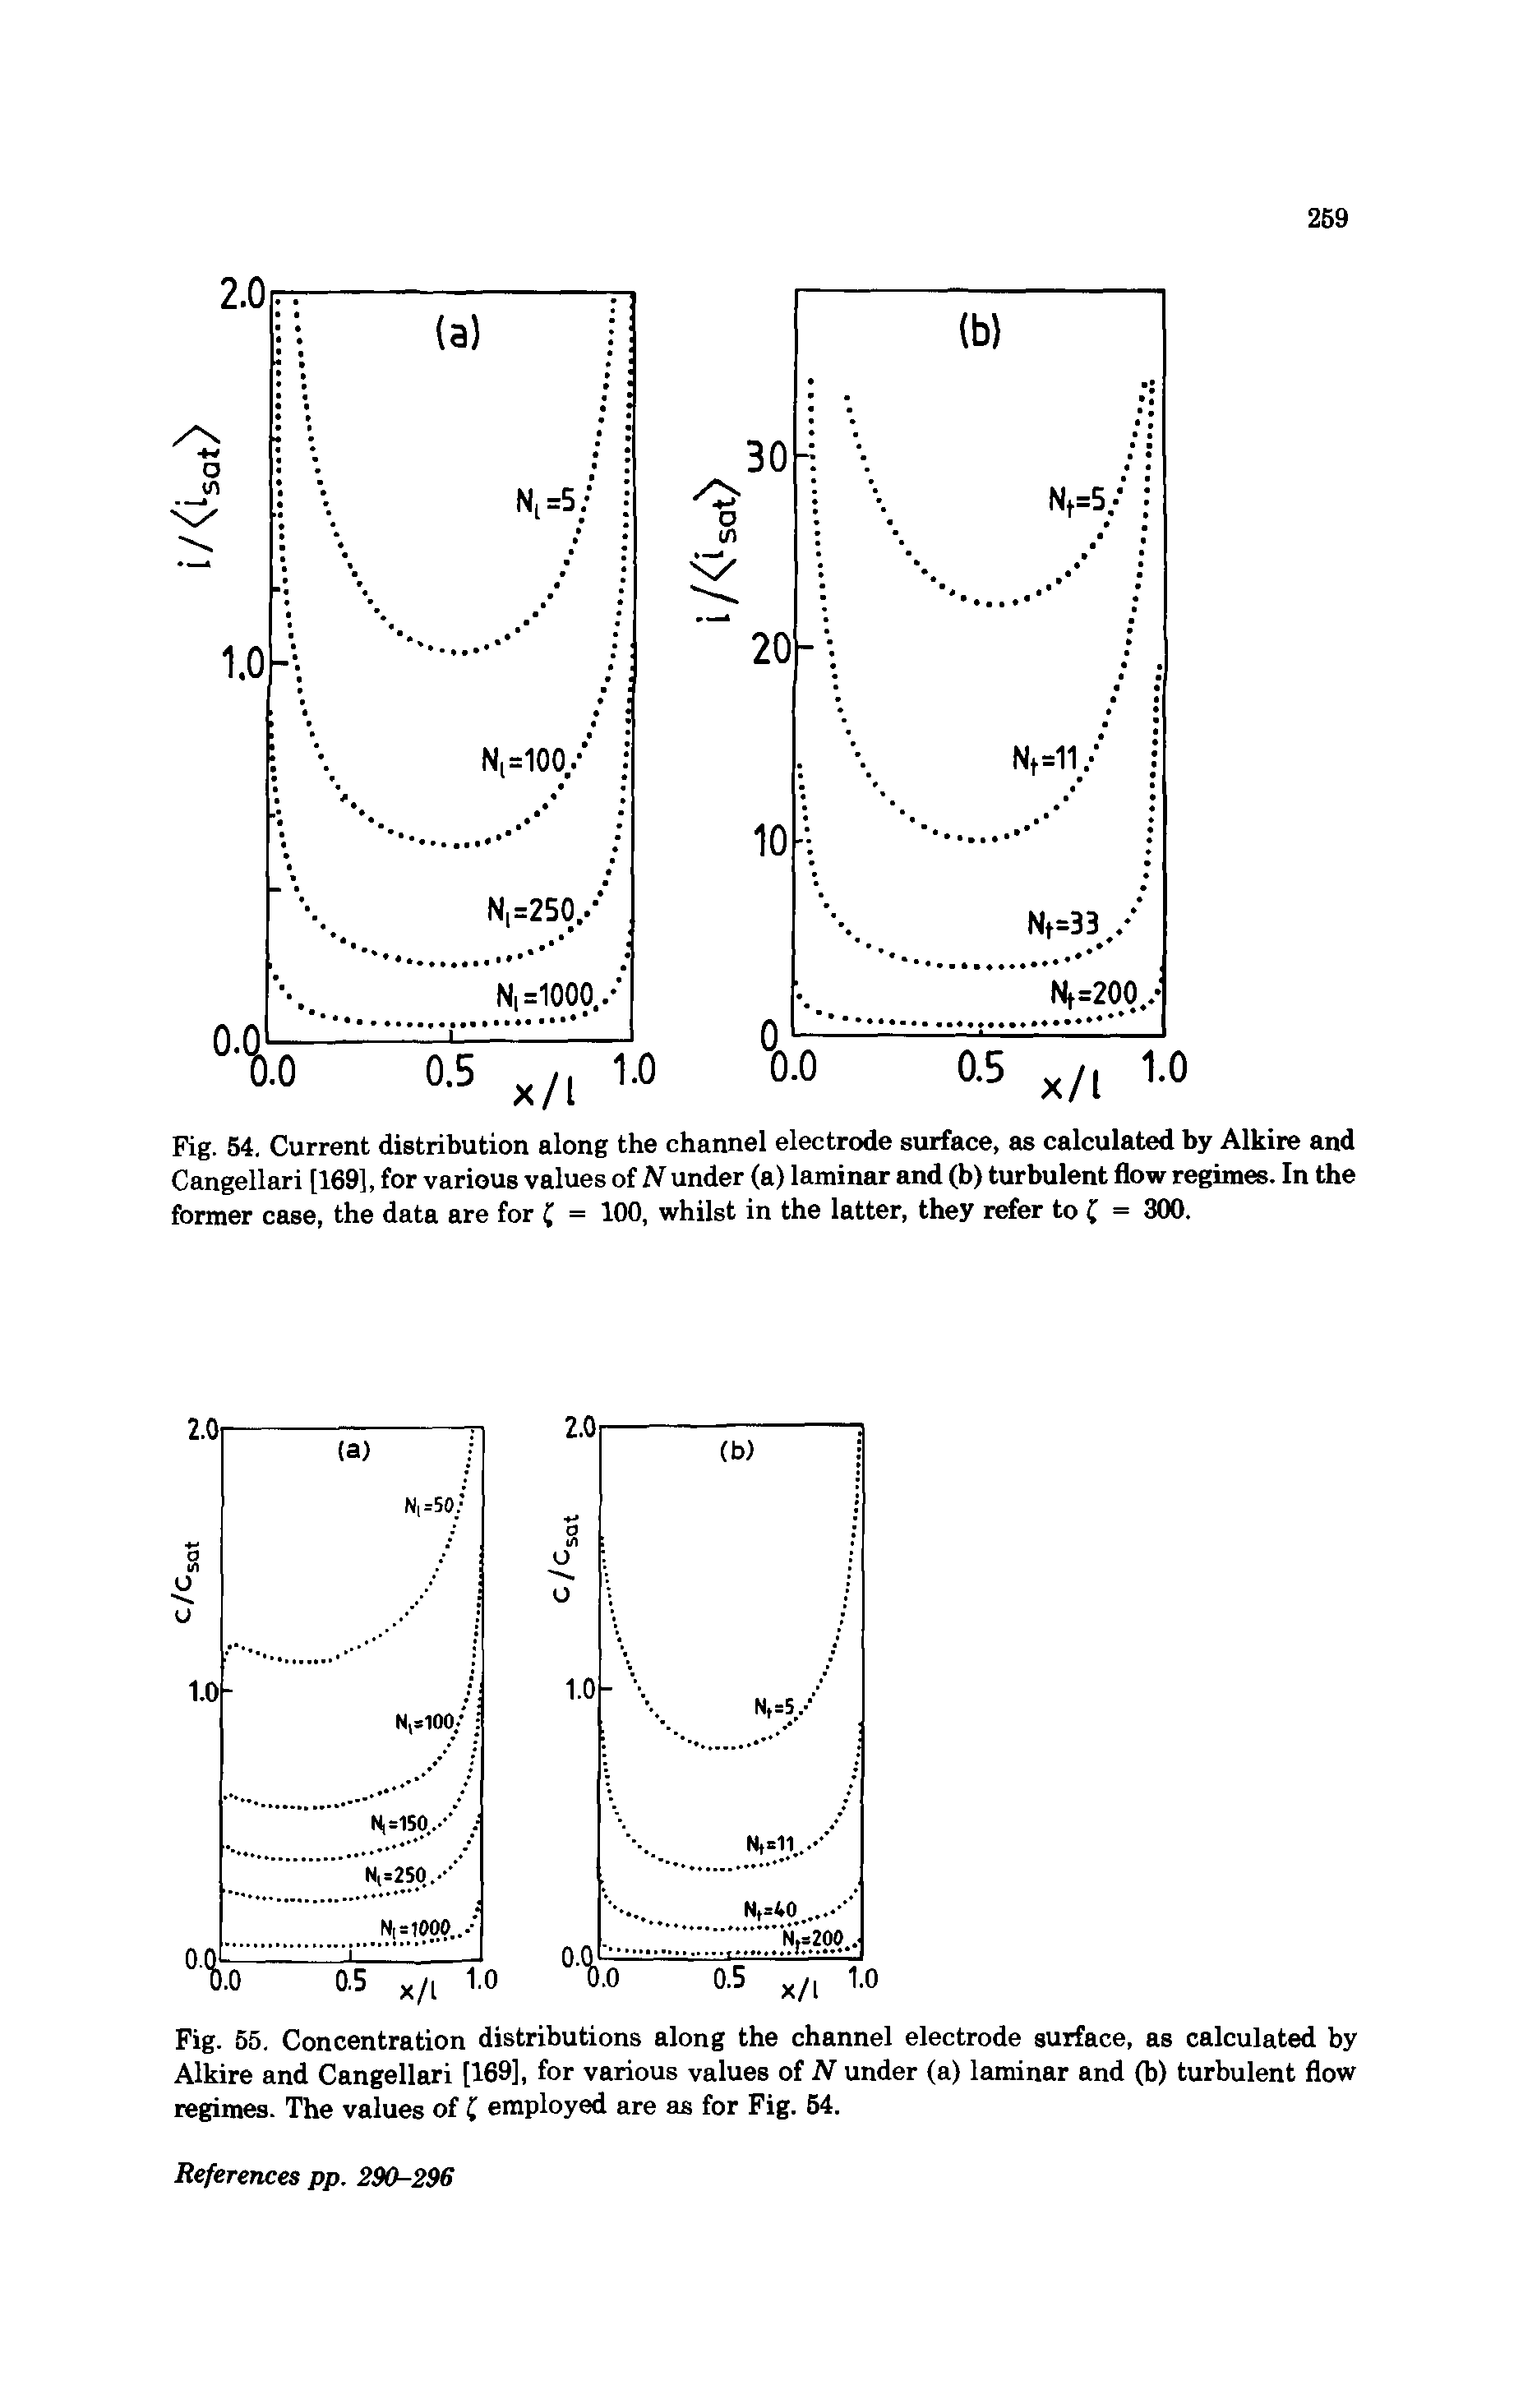 Fig. 54. Current distribution along the channel electrode surface, as calculated by Alkire and Cangellari [169], for various values of N under (a) laminar and (b) turbulent flow regimes. In the former case, the data are for ( = 100, whilst in the latter, they refer to ( = 300.